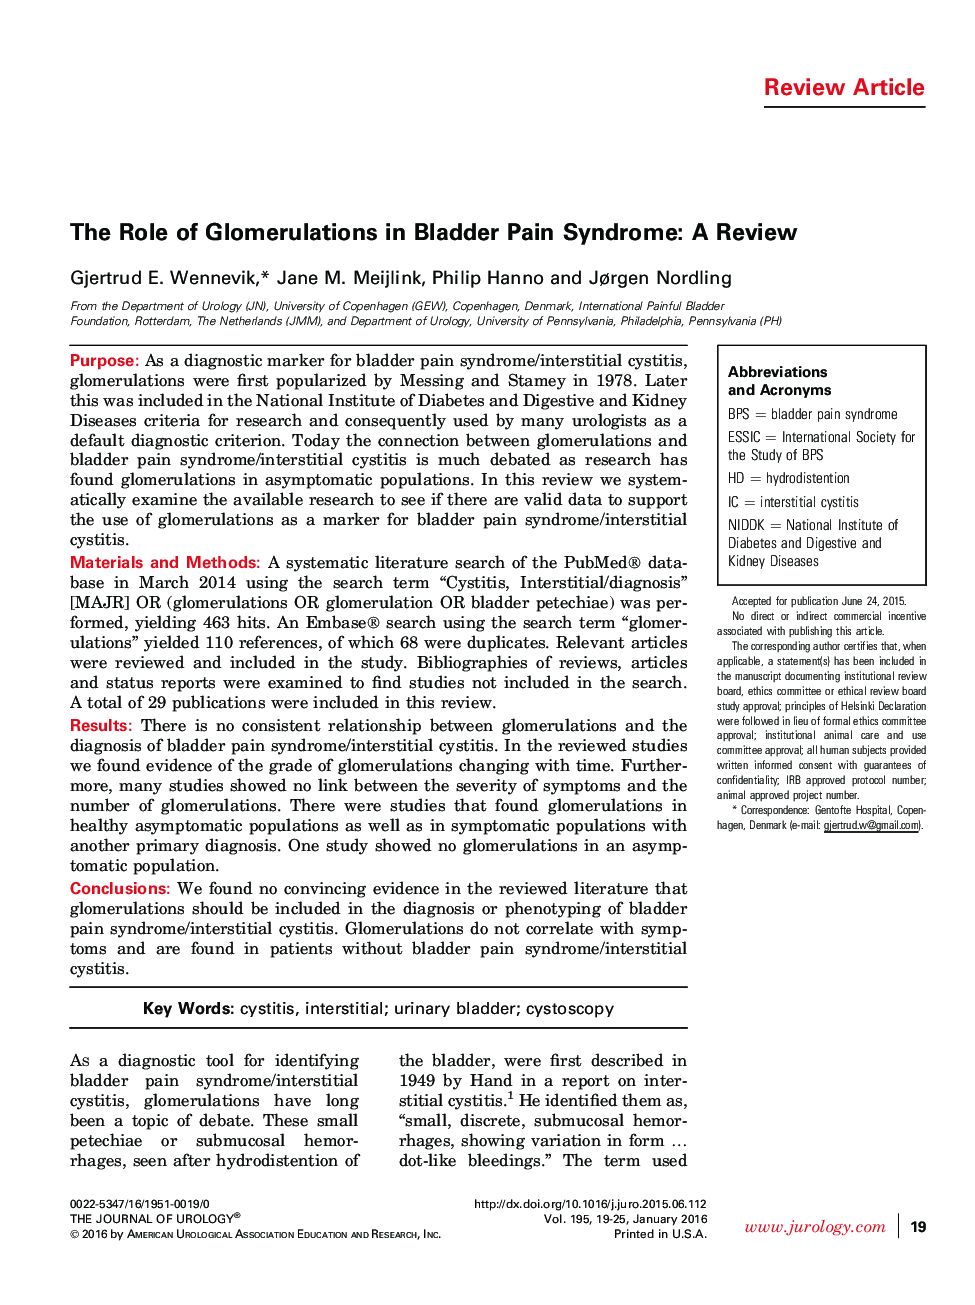 The Role of Glomerulations in Bladder Pain Syndrome: A Review